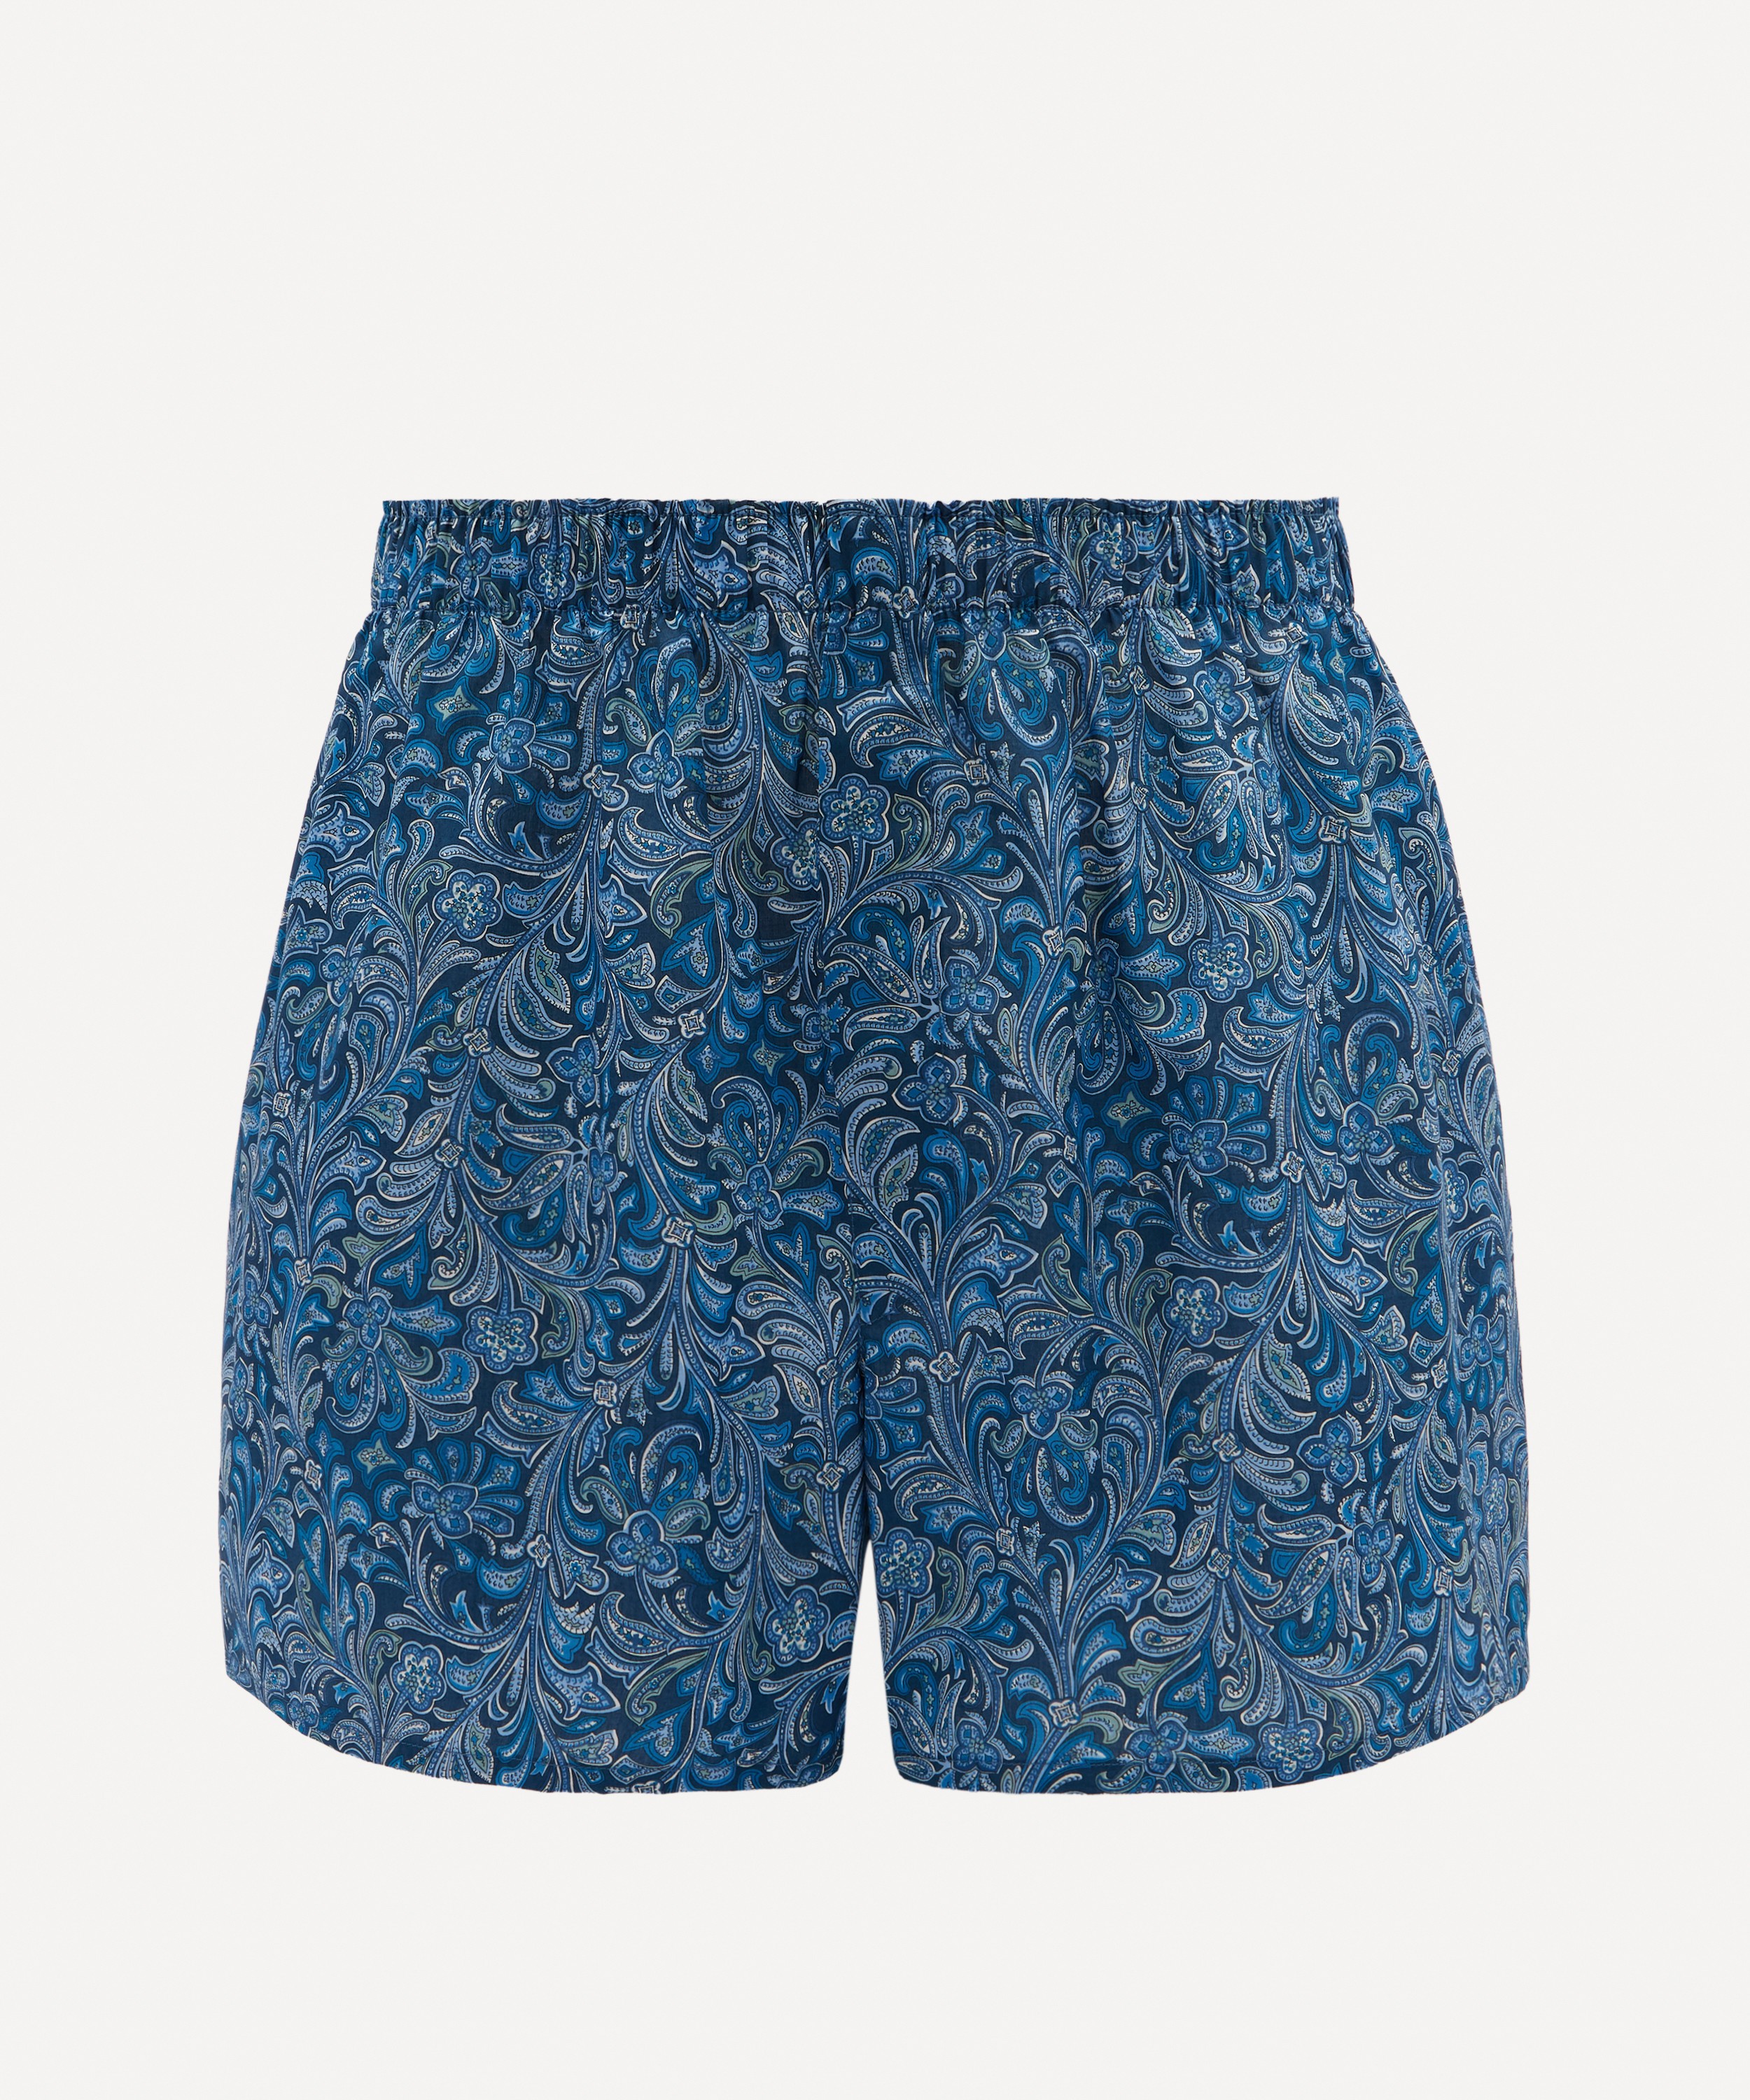 Sunspel - Liberty Print Boxer Shorts image number null